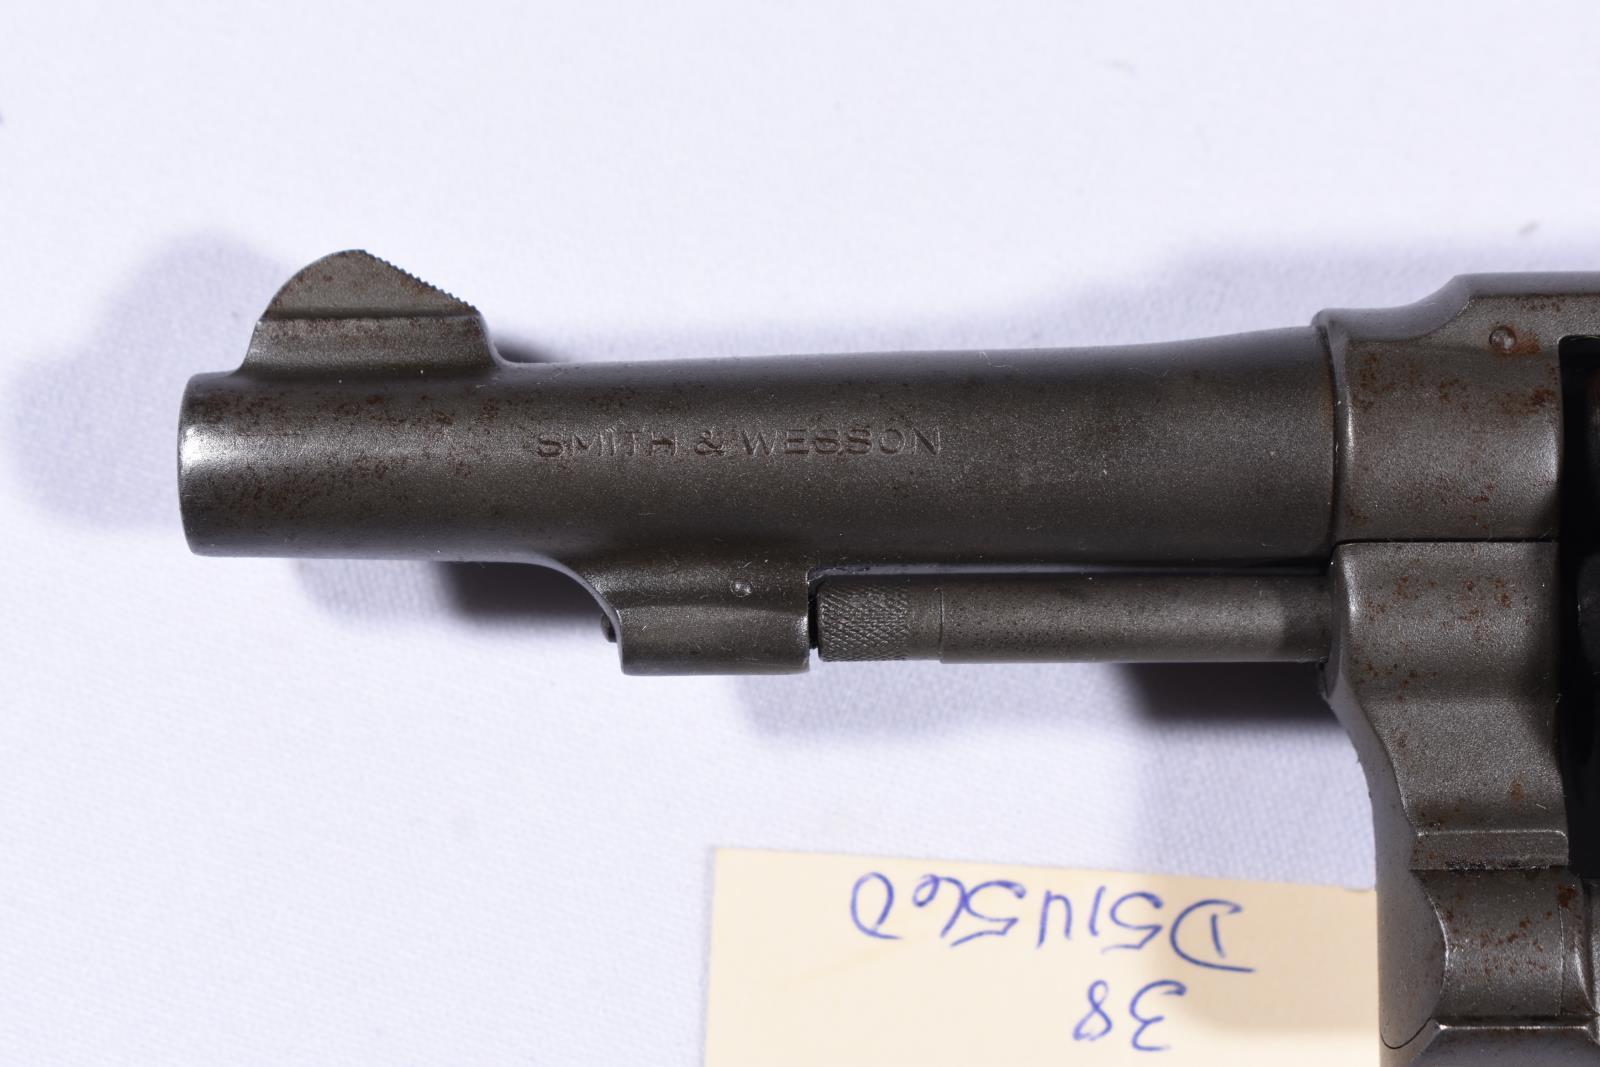 SMITH WESSON 10-5, SN D514560